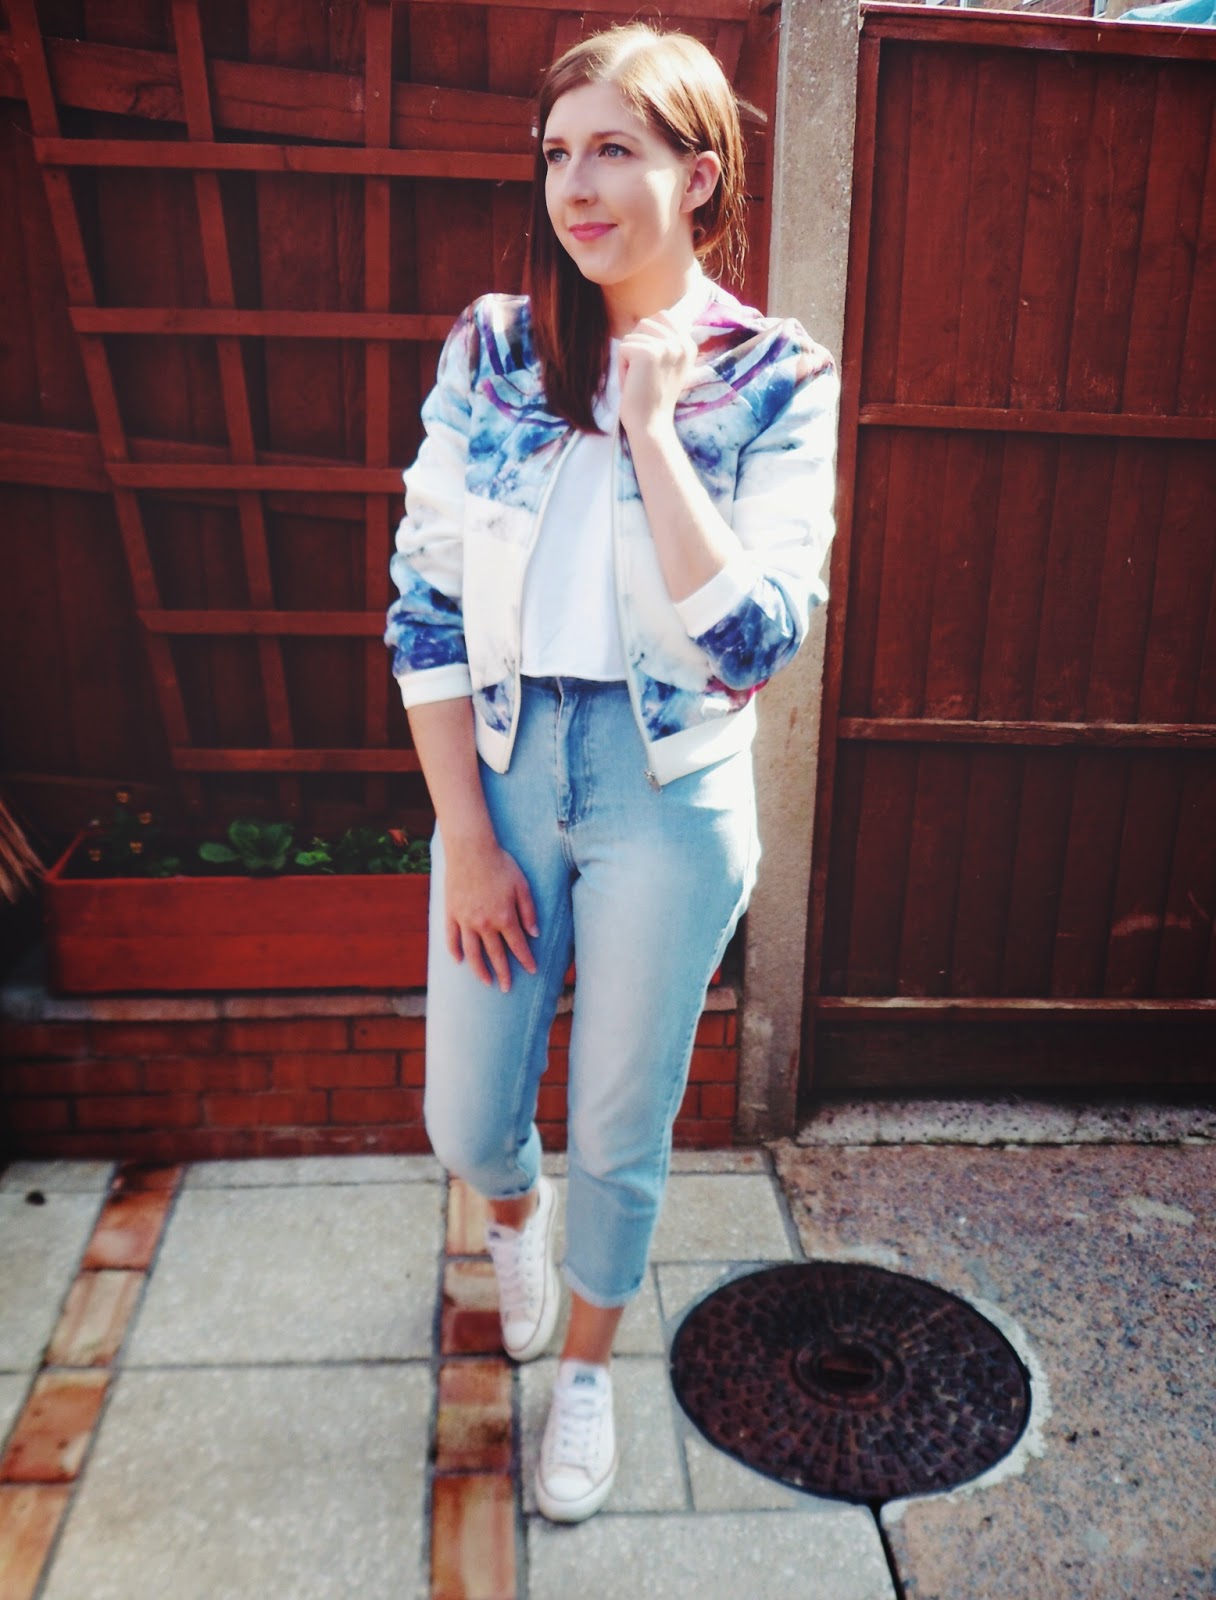 ASOS, asseenonme, bomberjacket, topshop, fblogger, fbloggers, jellyshoes, momjeans, missguided, momshorts, newlook, ootd, outfitoftheday, summer, whatibought, whatimwearing, wiw